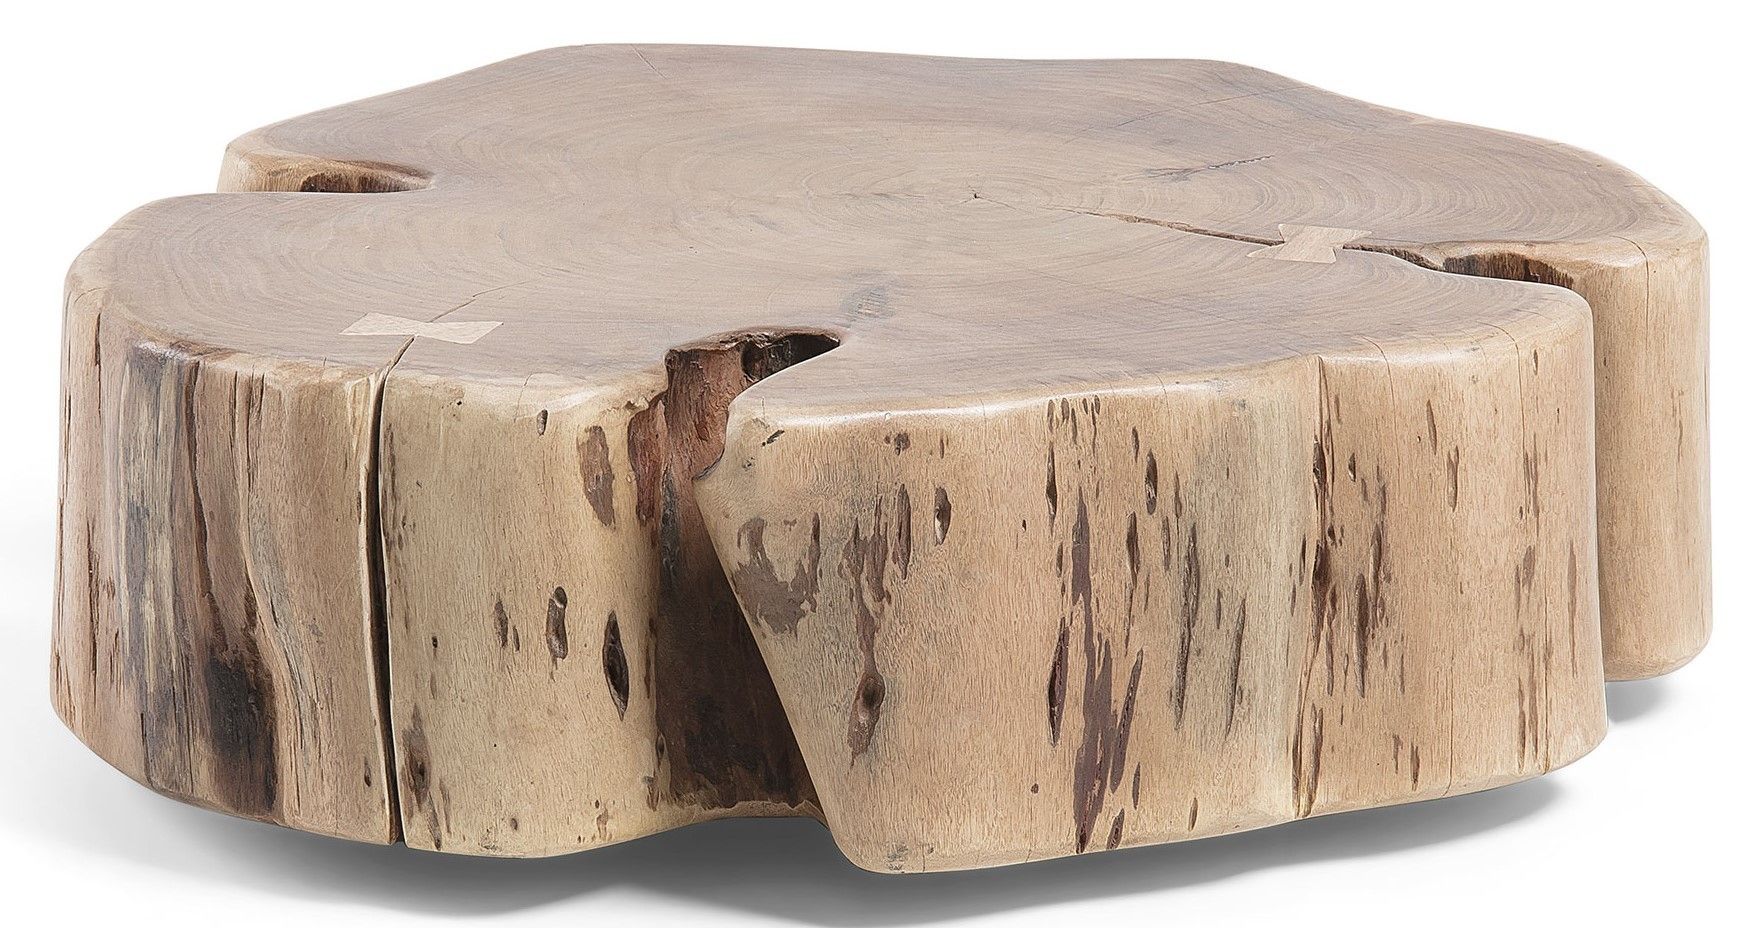 Doni Small Table With Wheels In Solid Acacia Wood In Solid Acacia Wood Coffee Tables (View 14 of 20)